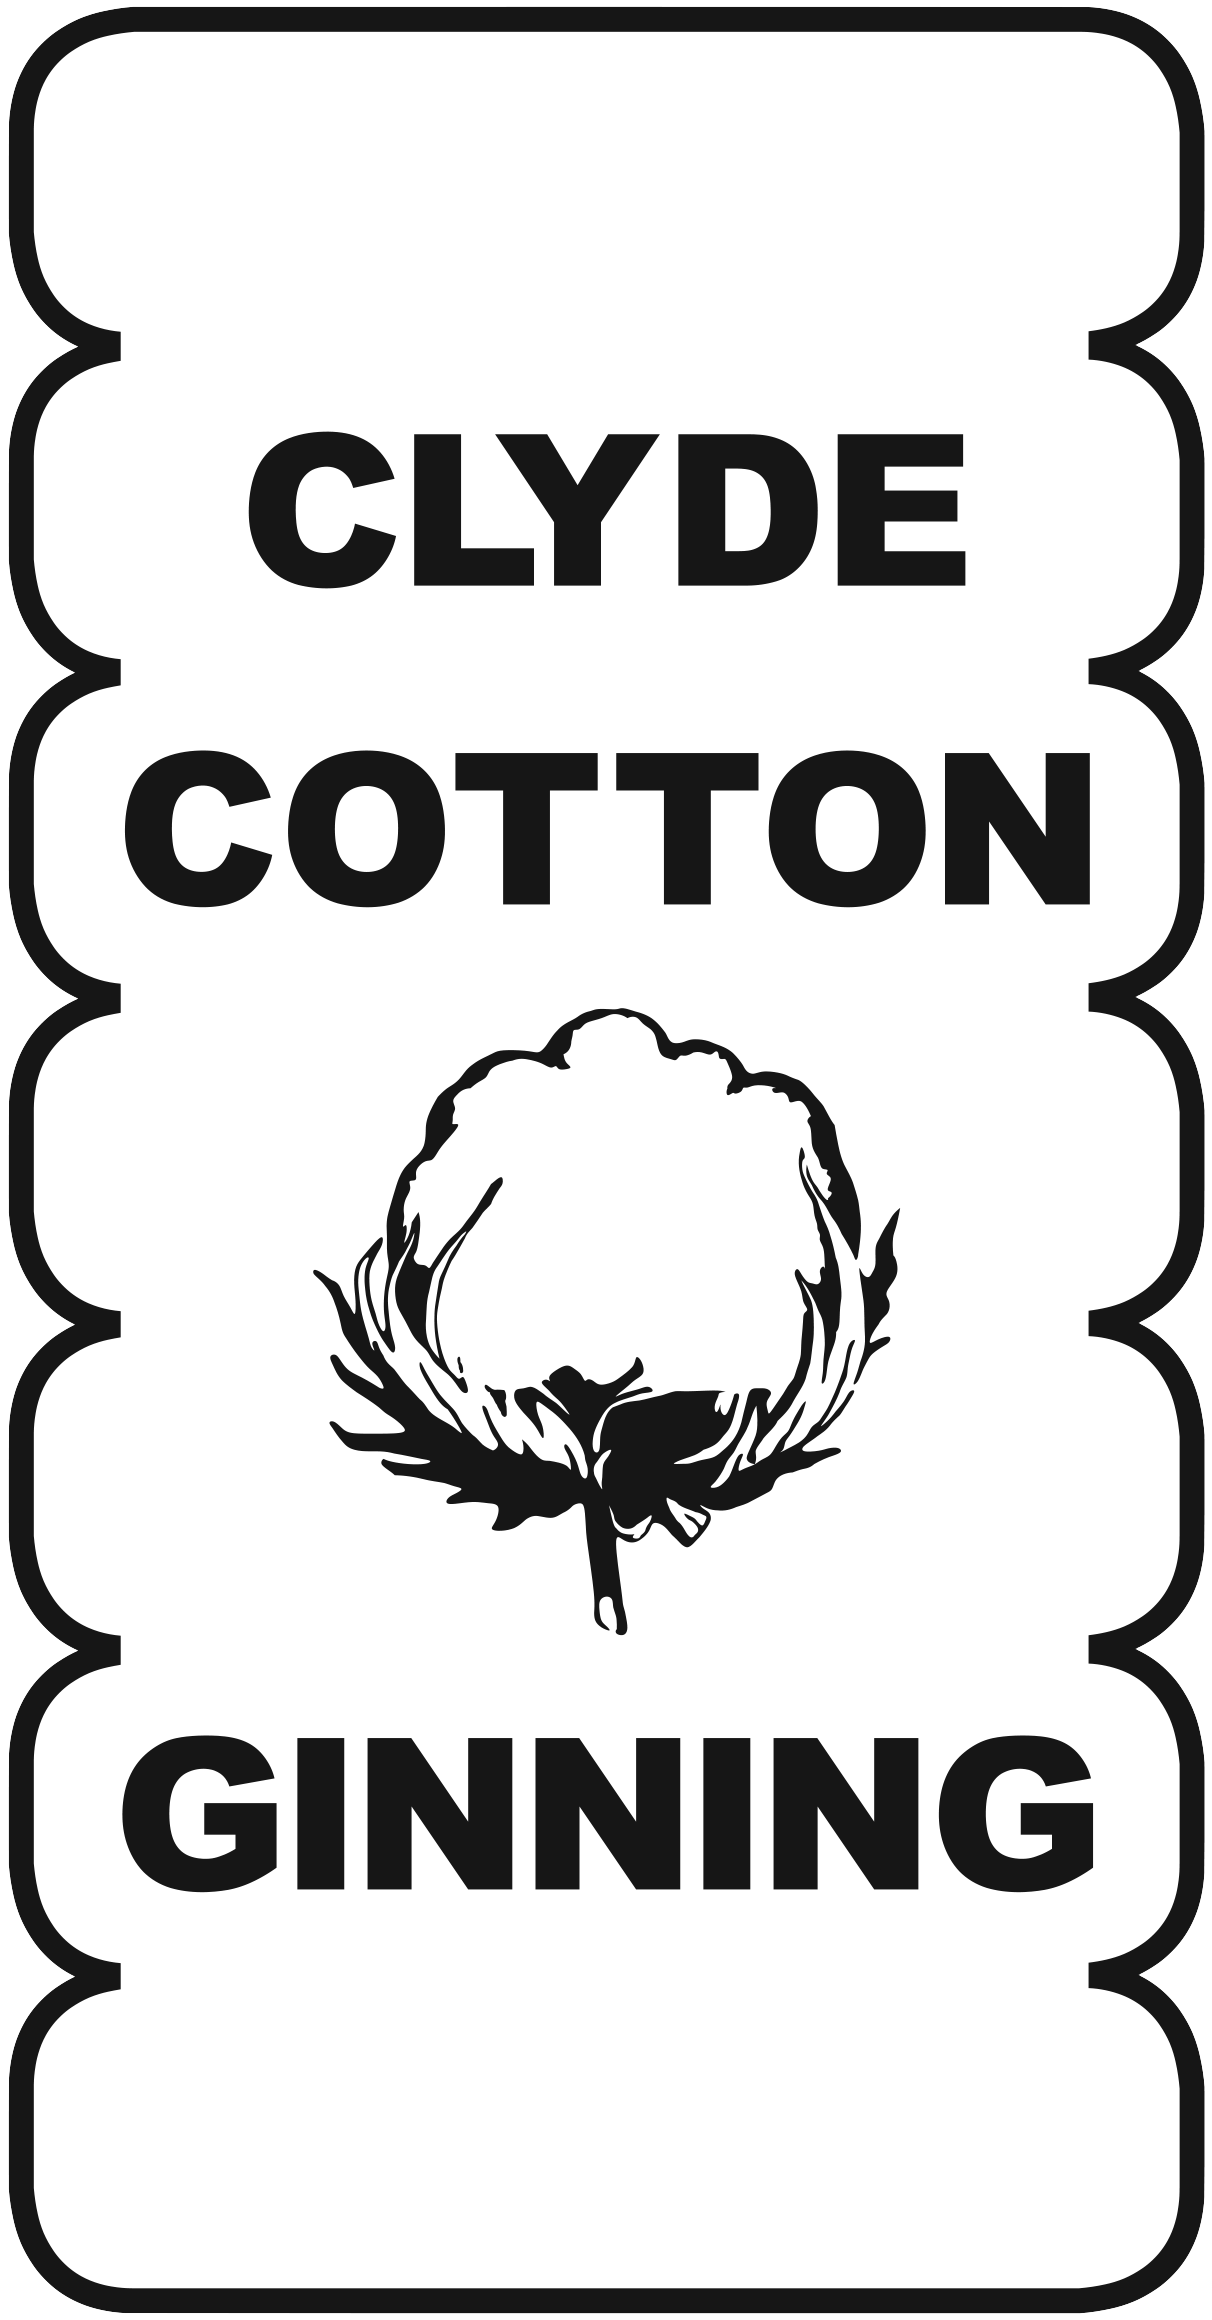 A black and white logo for clyde cotton ginning with a picture of a cotton plant.